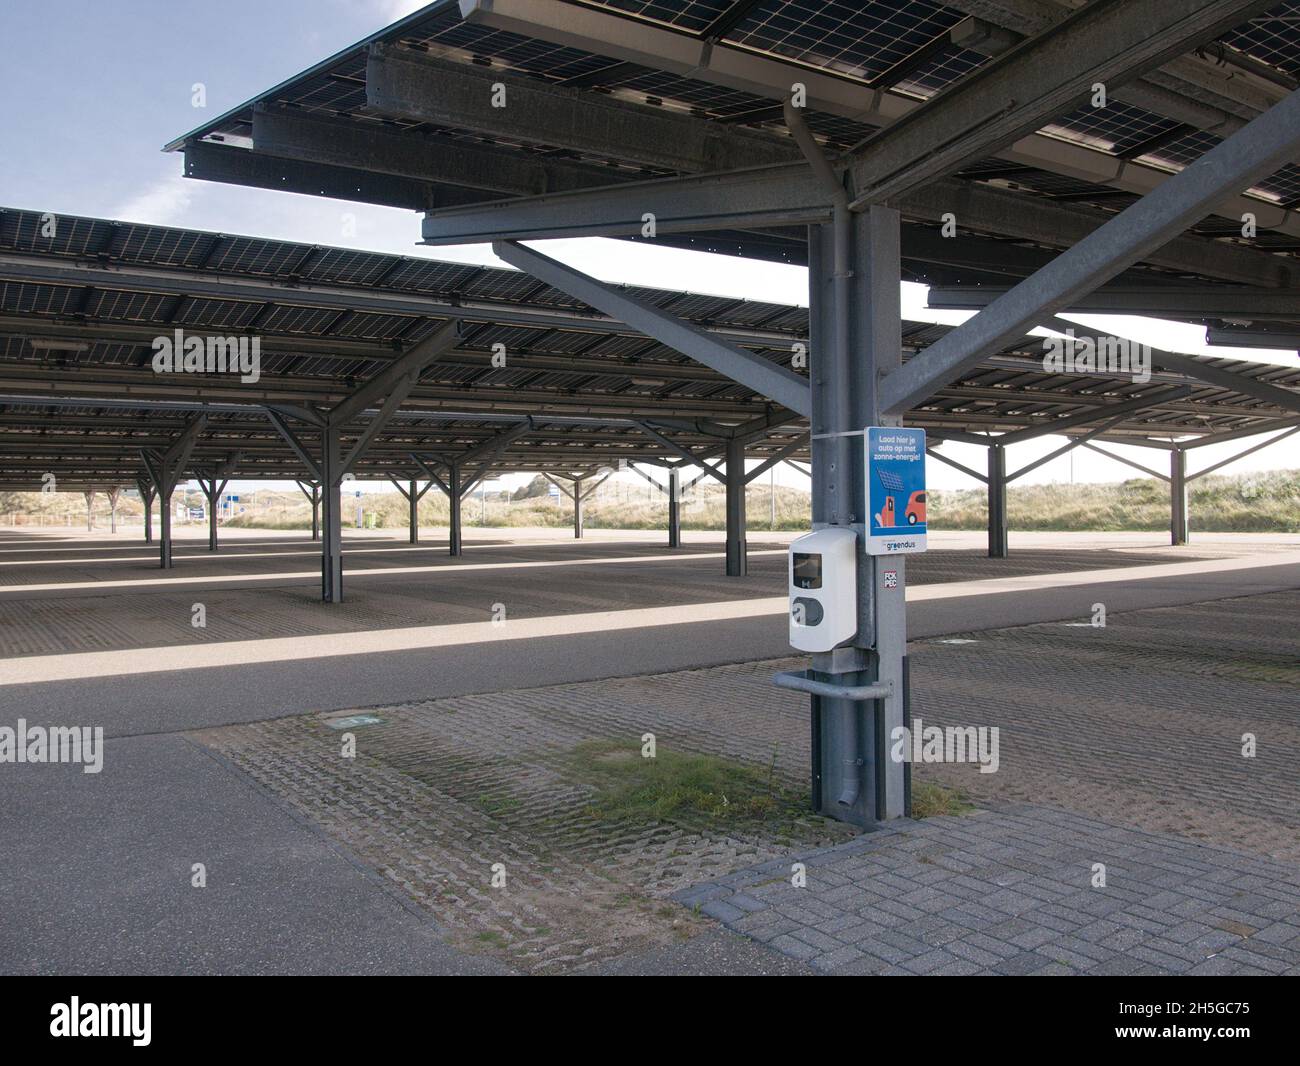 A charge point for electric vehicles under solar panels in a car park in Bloemendaal aan Zee in The Netherlands. Stock Photo